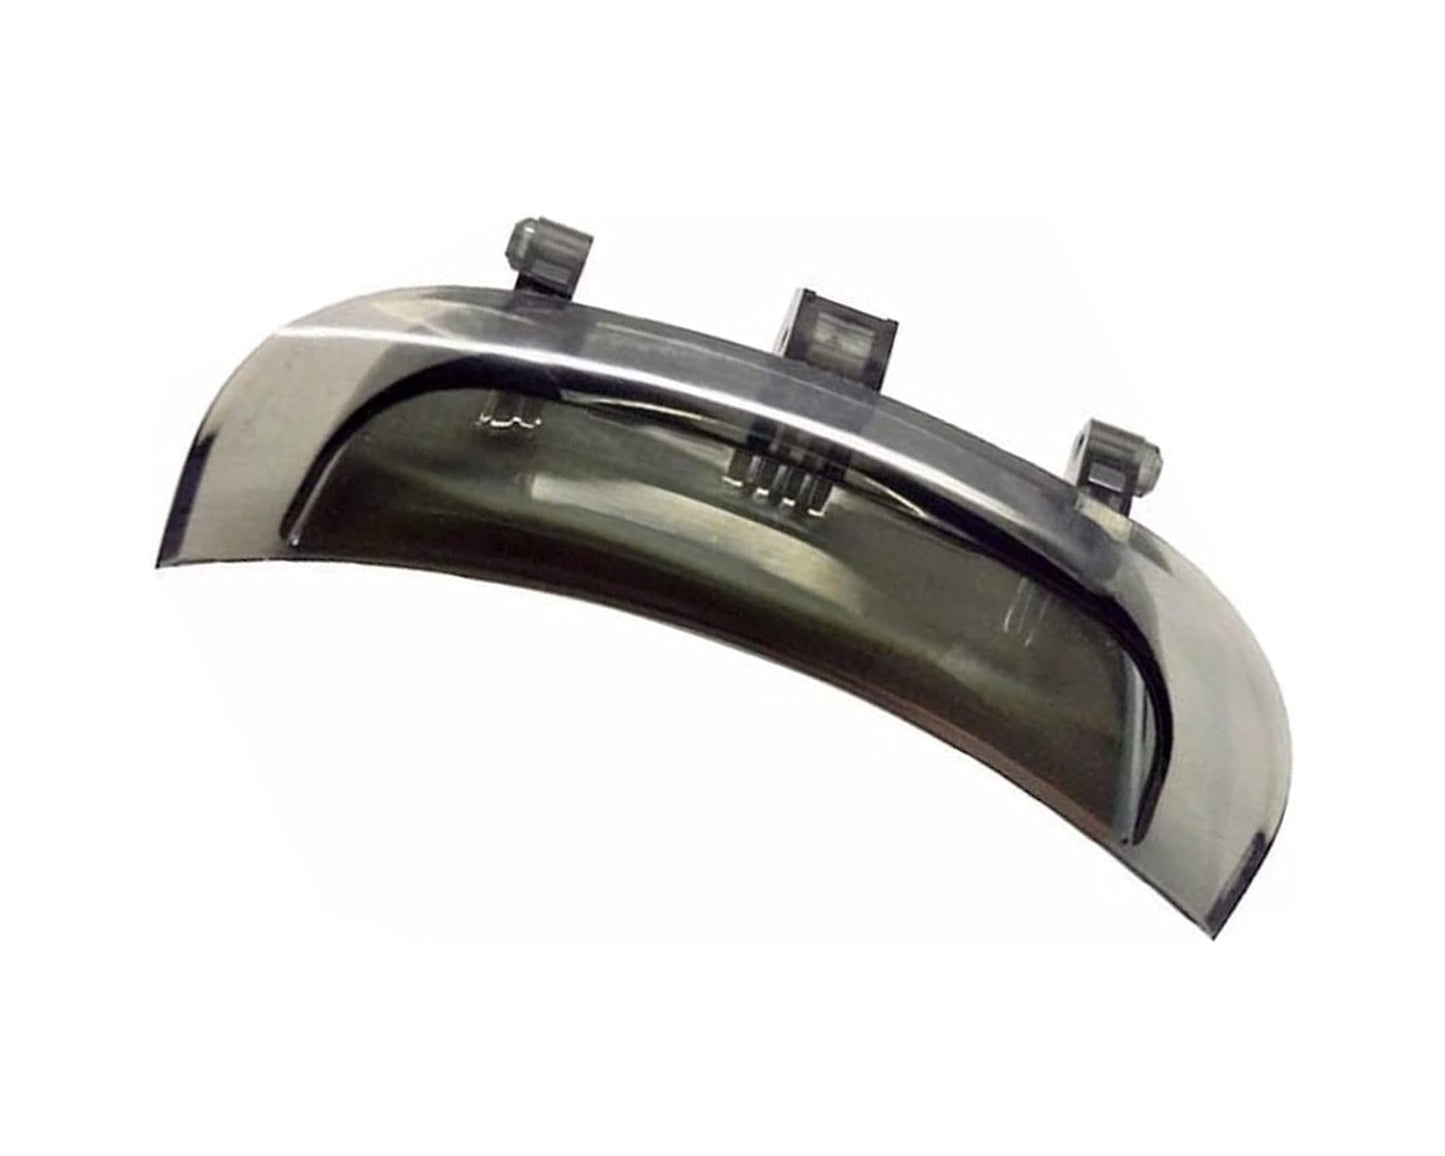 Genuine Door Handle for Hoover Candy Washing Machine Grey 'See Through' - 43011740, ES1778149